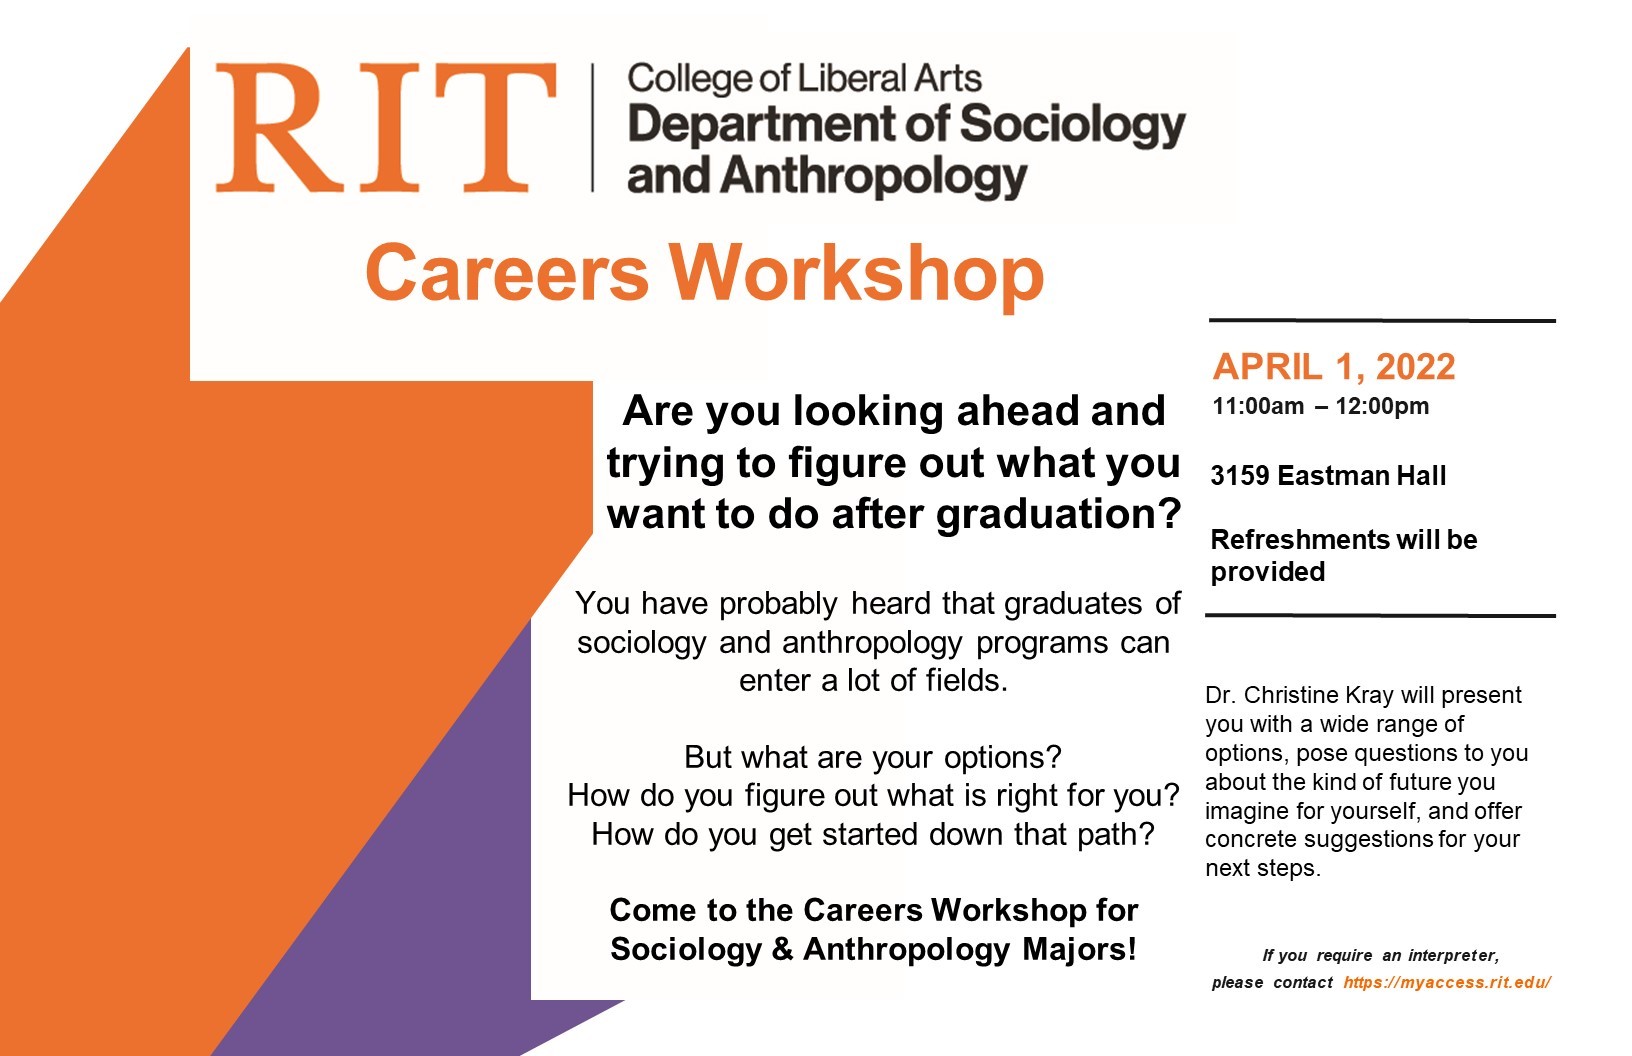 An orange, black, and purple image depicting the date, time, and place of the Sociology & Anthropology Careers Workshop.